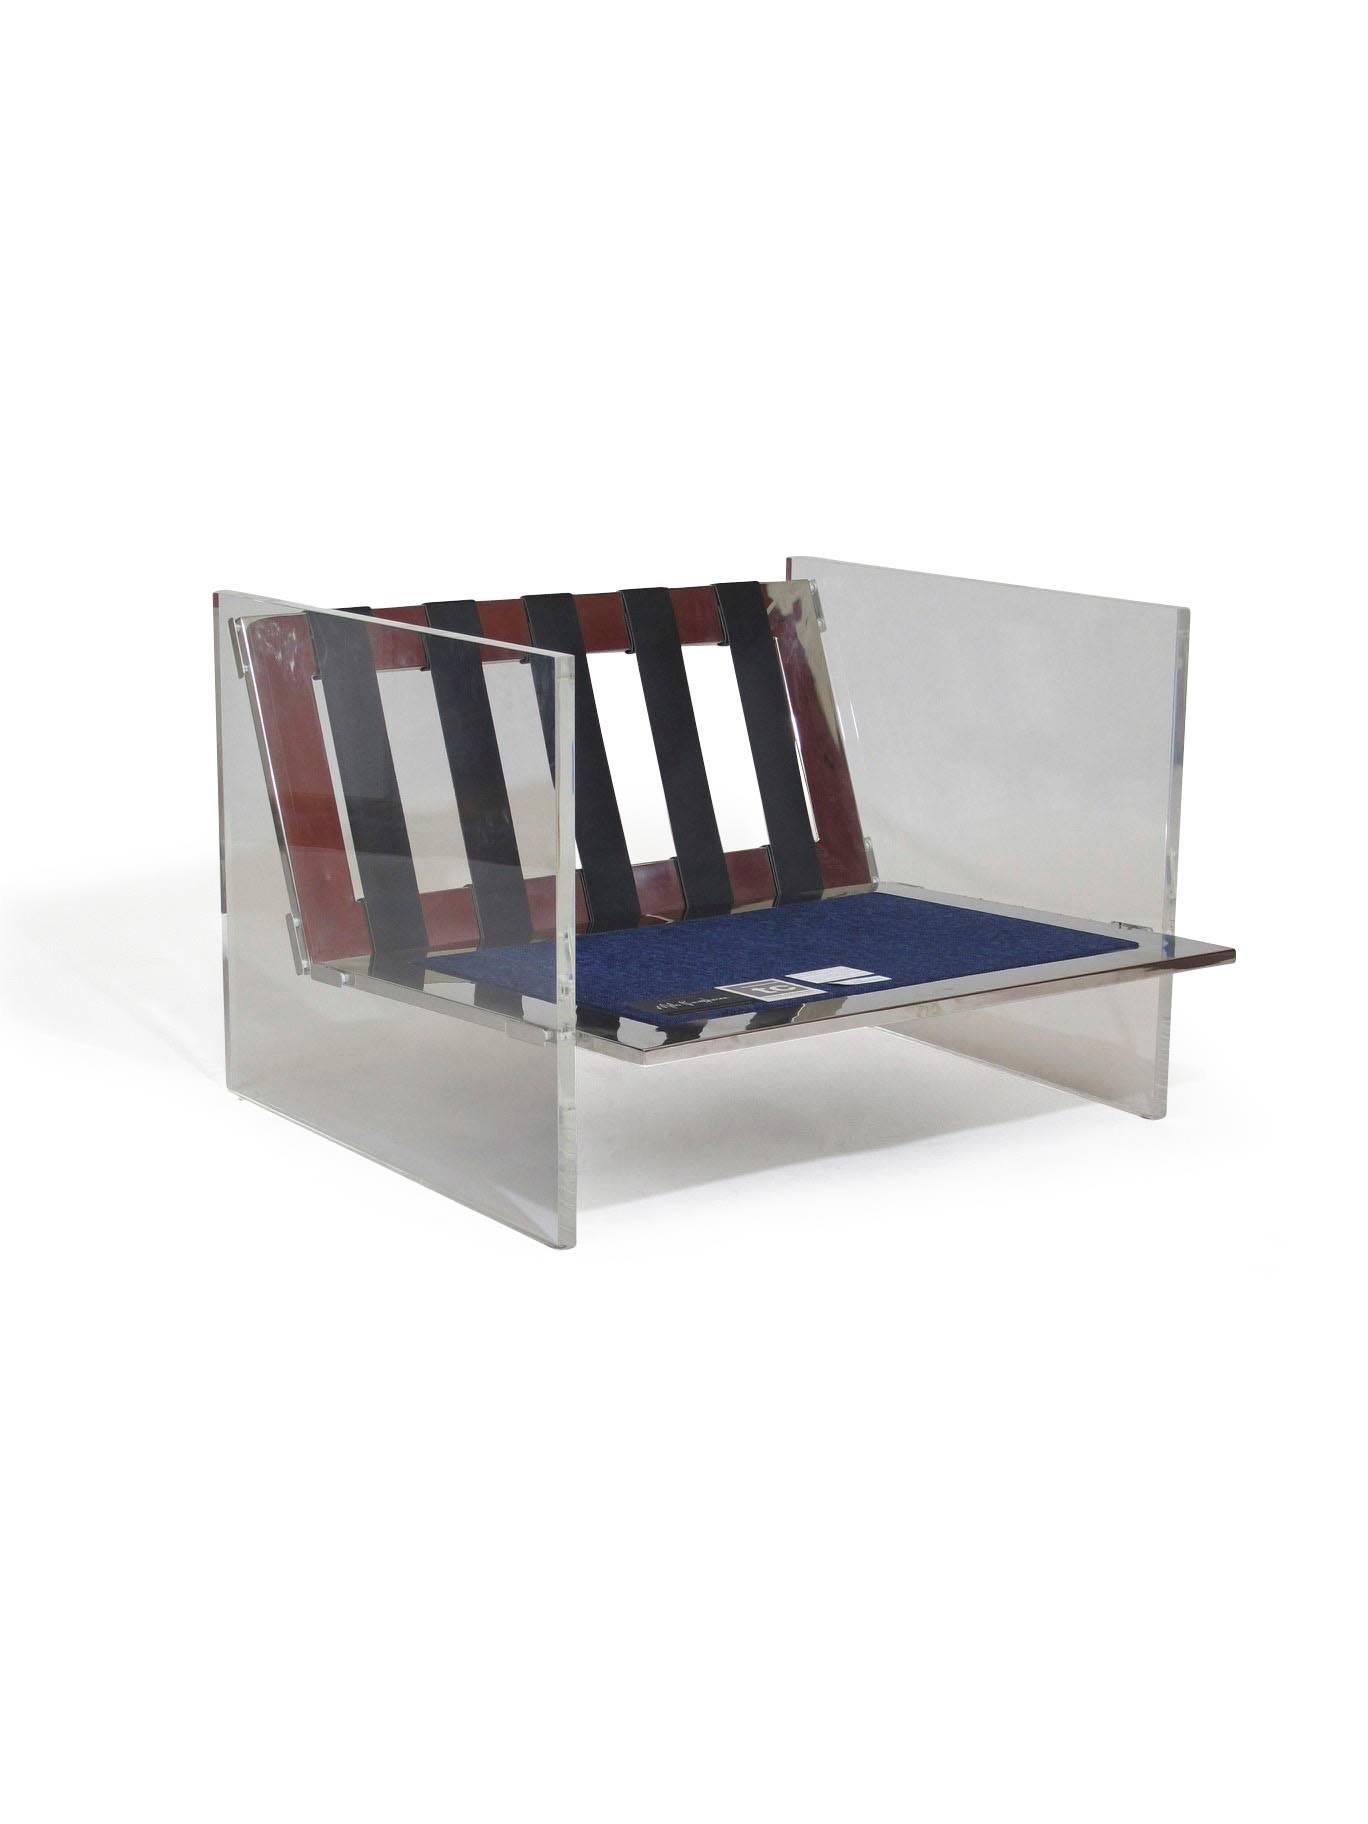 Lucite and chrome lounge chair designed by Milo Baughman for Thayer Coggin upholstered in navy blue chenille fabric. 
Features clear acrylic side panels on polished stainless frame with leather strapping. 
Custom COM options available upon request. 